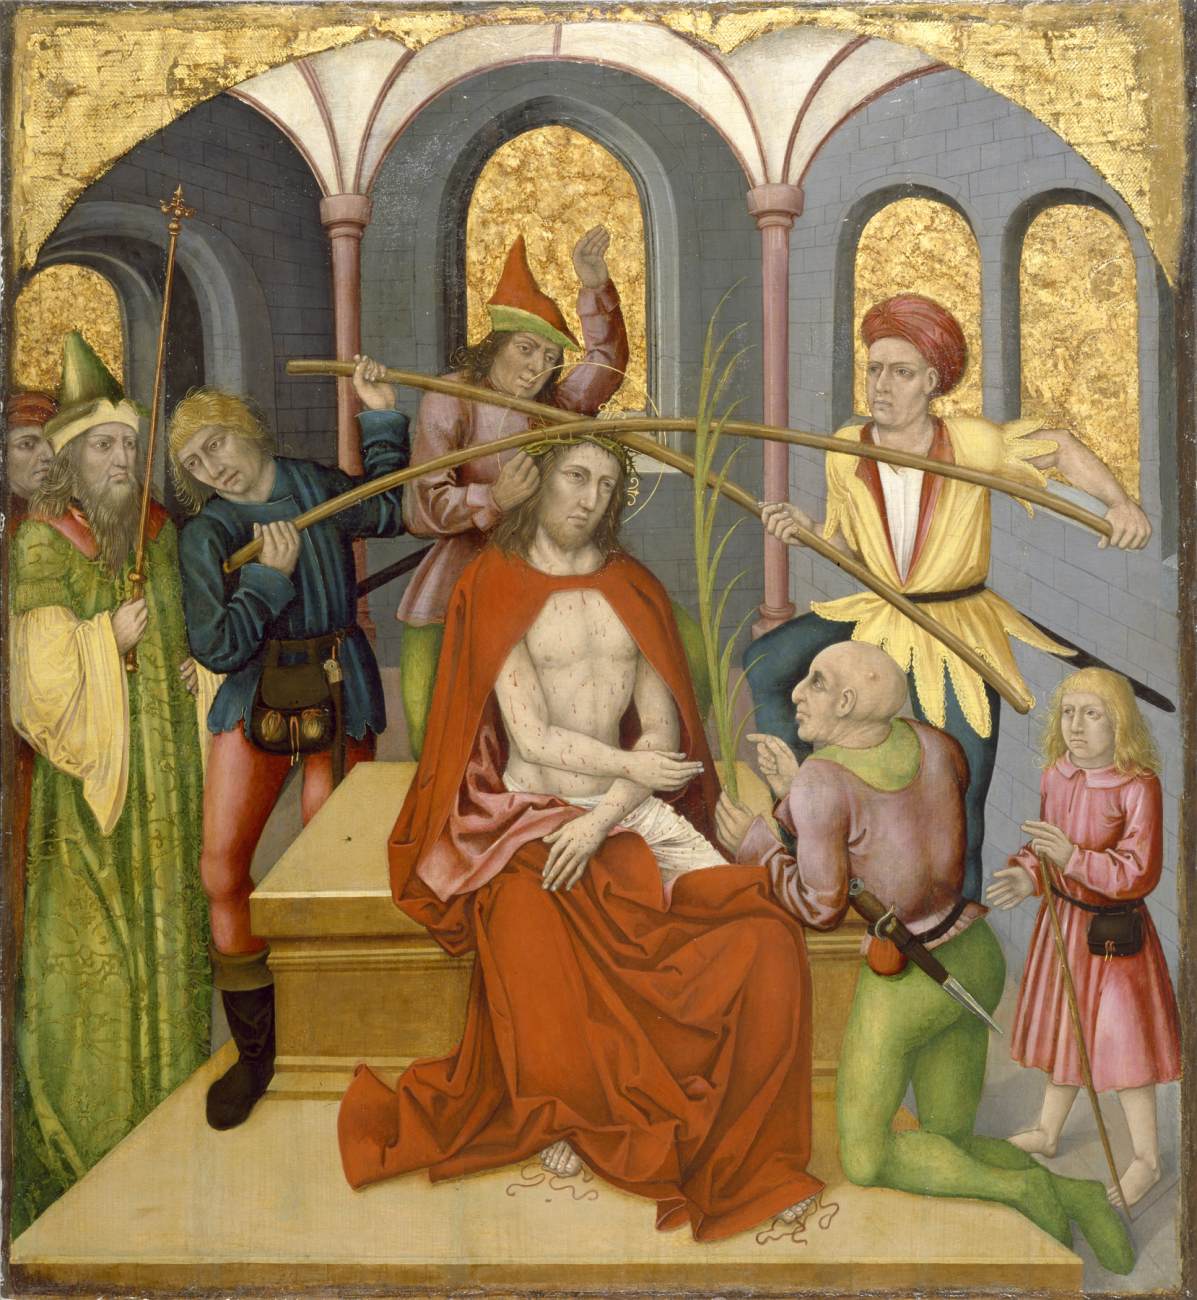 Altarpiece with The Passion of Christ: Christ is Mocked